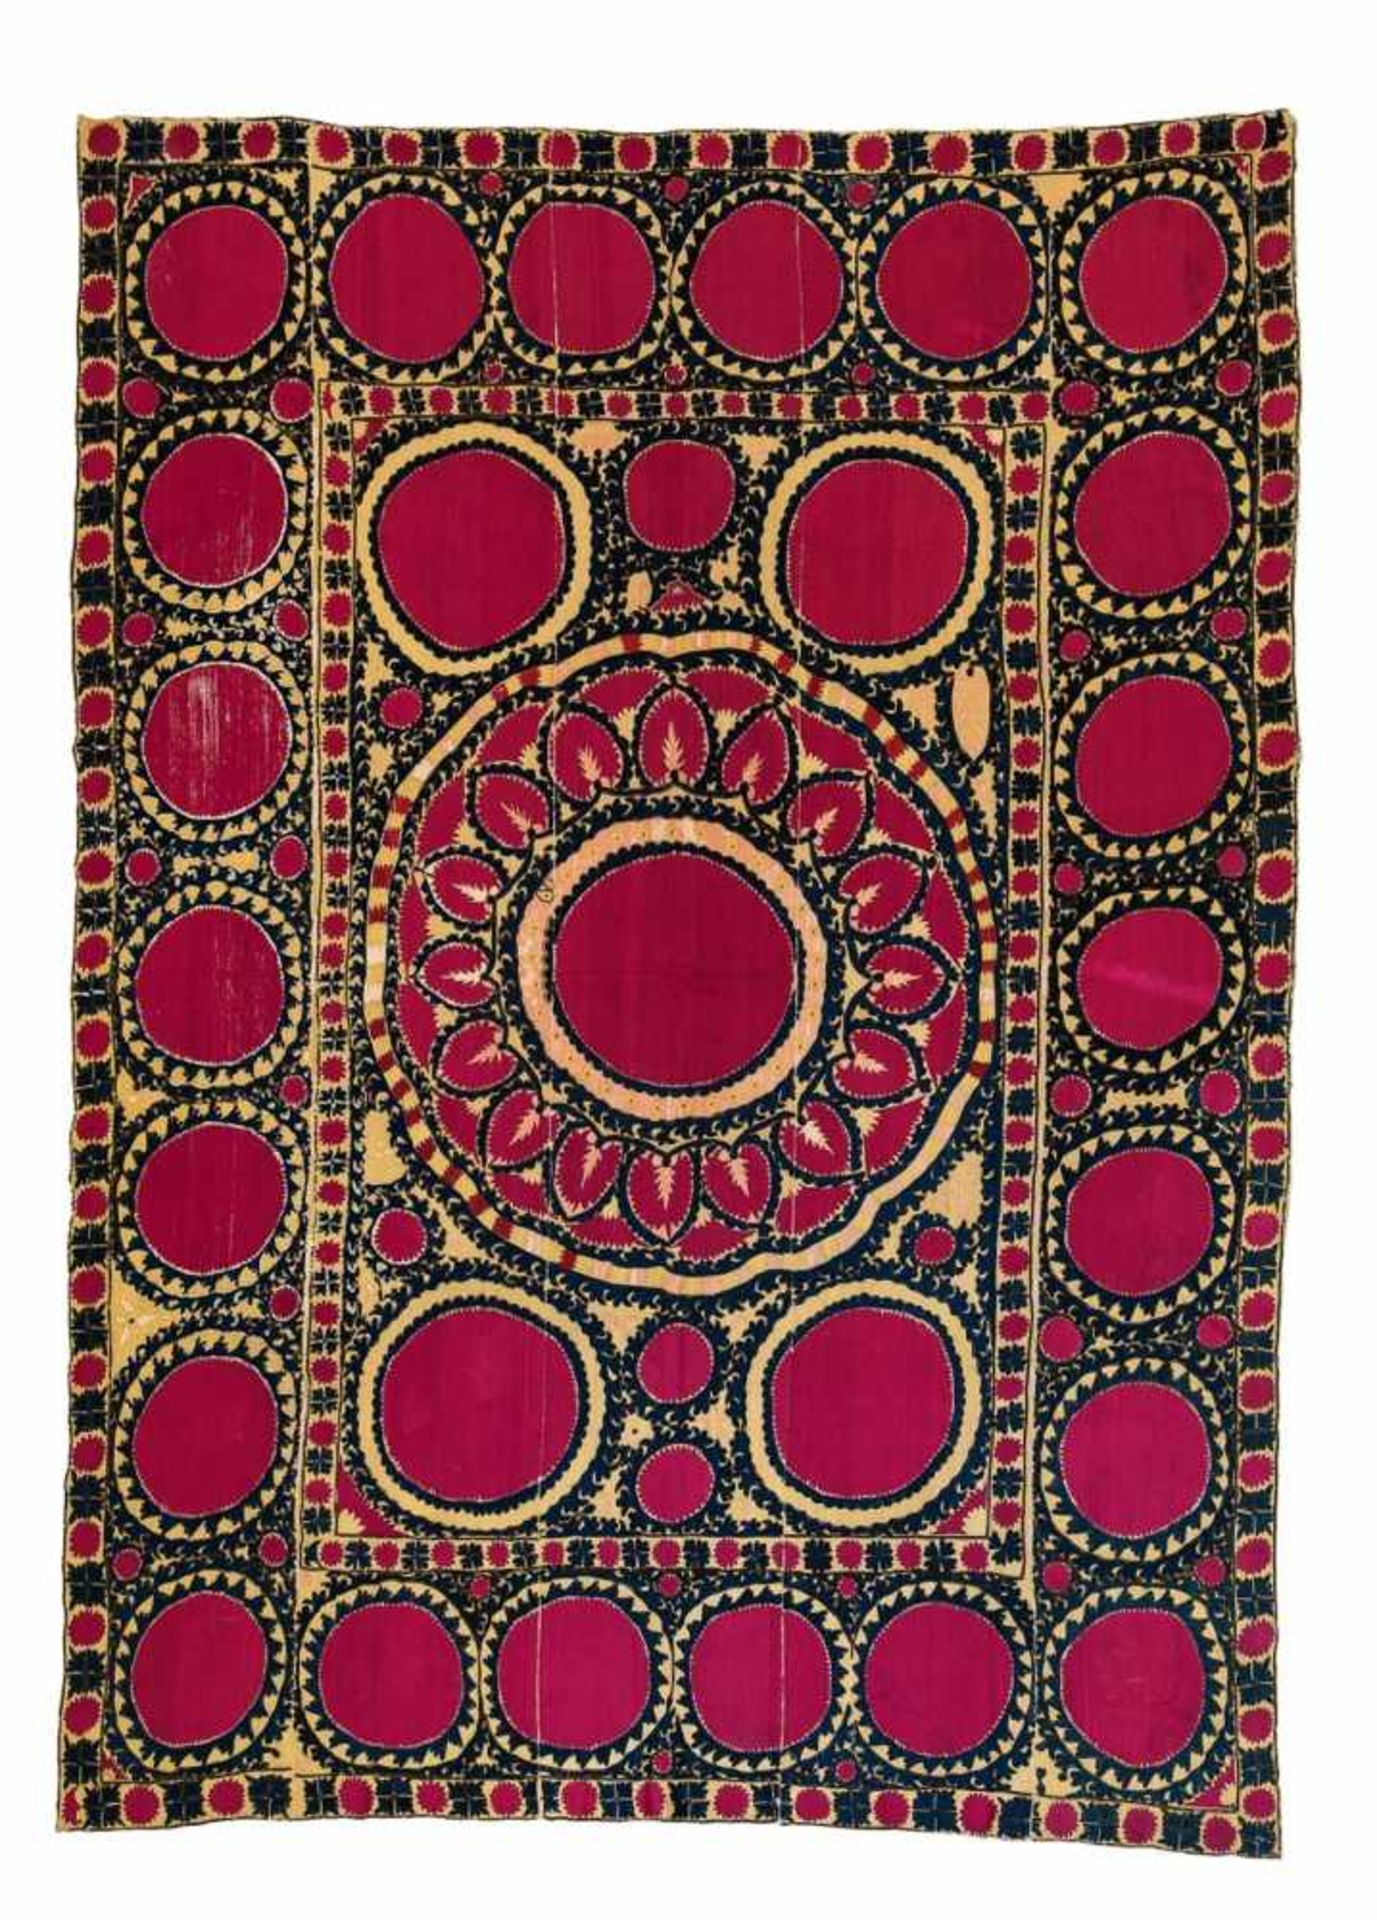 A Suzani embroideryComprising four cotton lengths sewn together, with magenta disc and dark blue